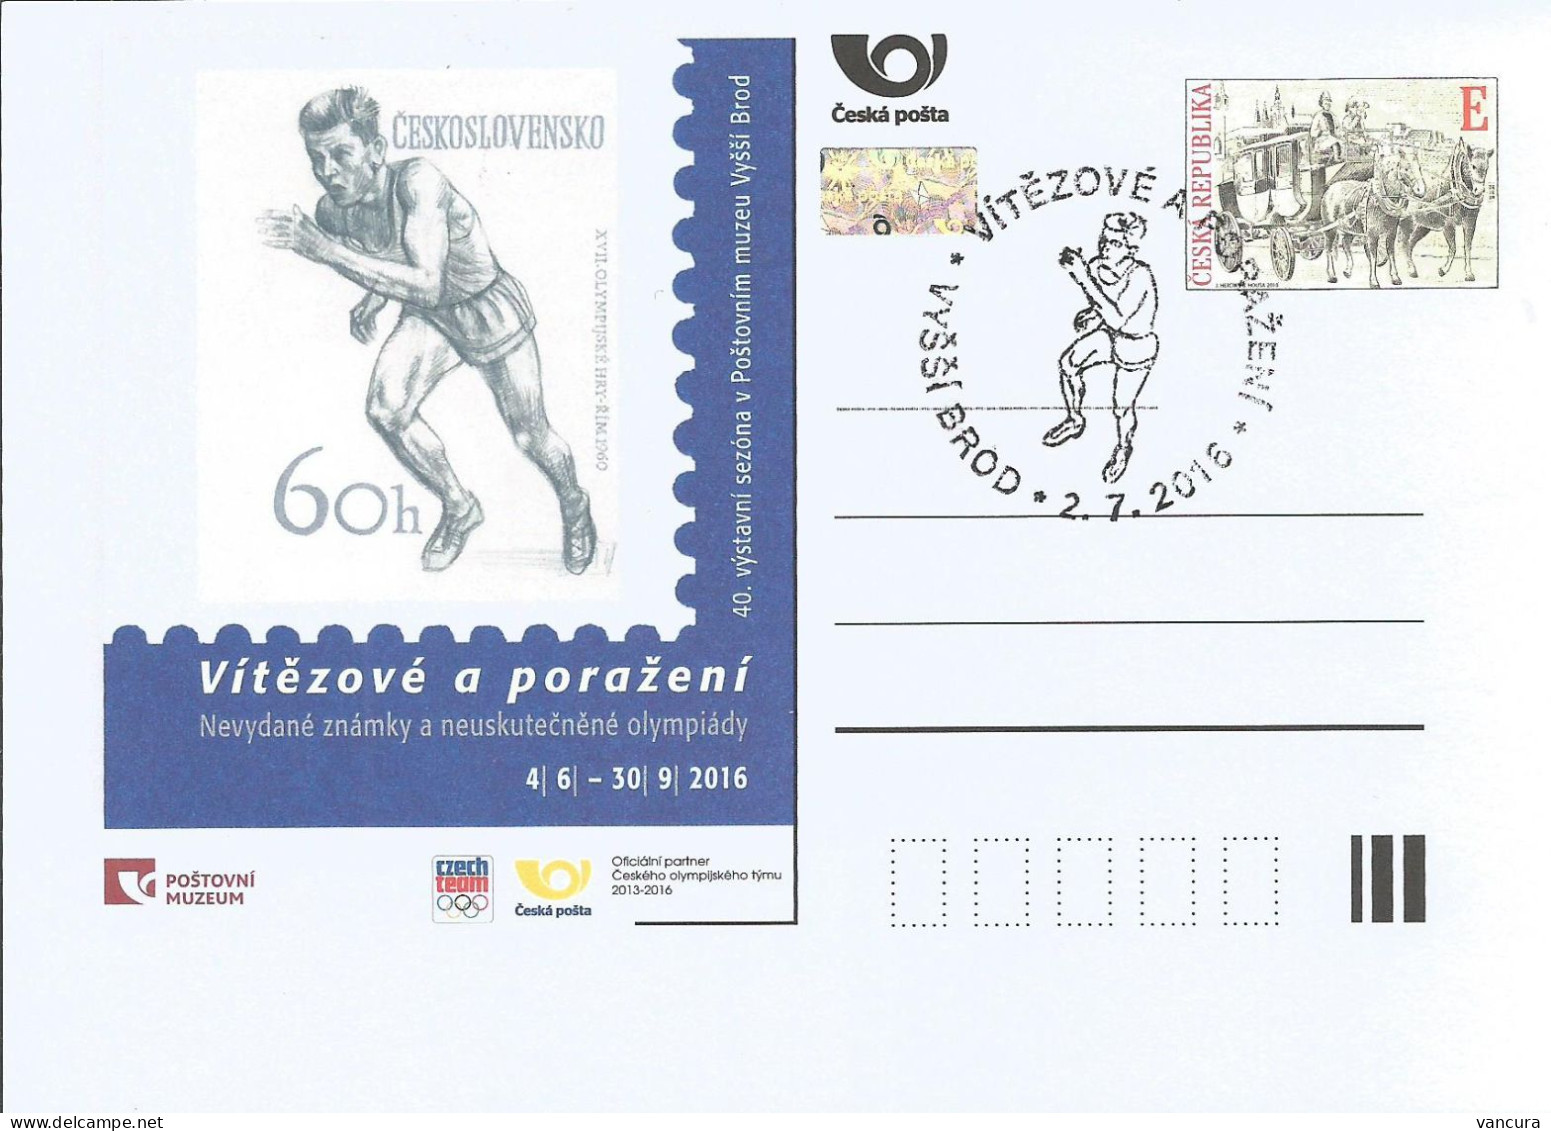 CDV PM 112 Czech Republic Exhibition In Post Museum In Vyssi Brod/Hohenfurth - Unissued Designs Of Olympic Stamps 2016 - Verano 1960: Roma